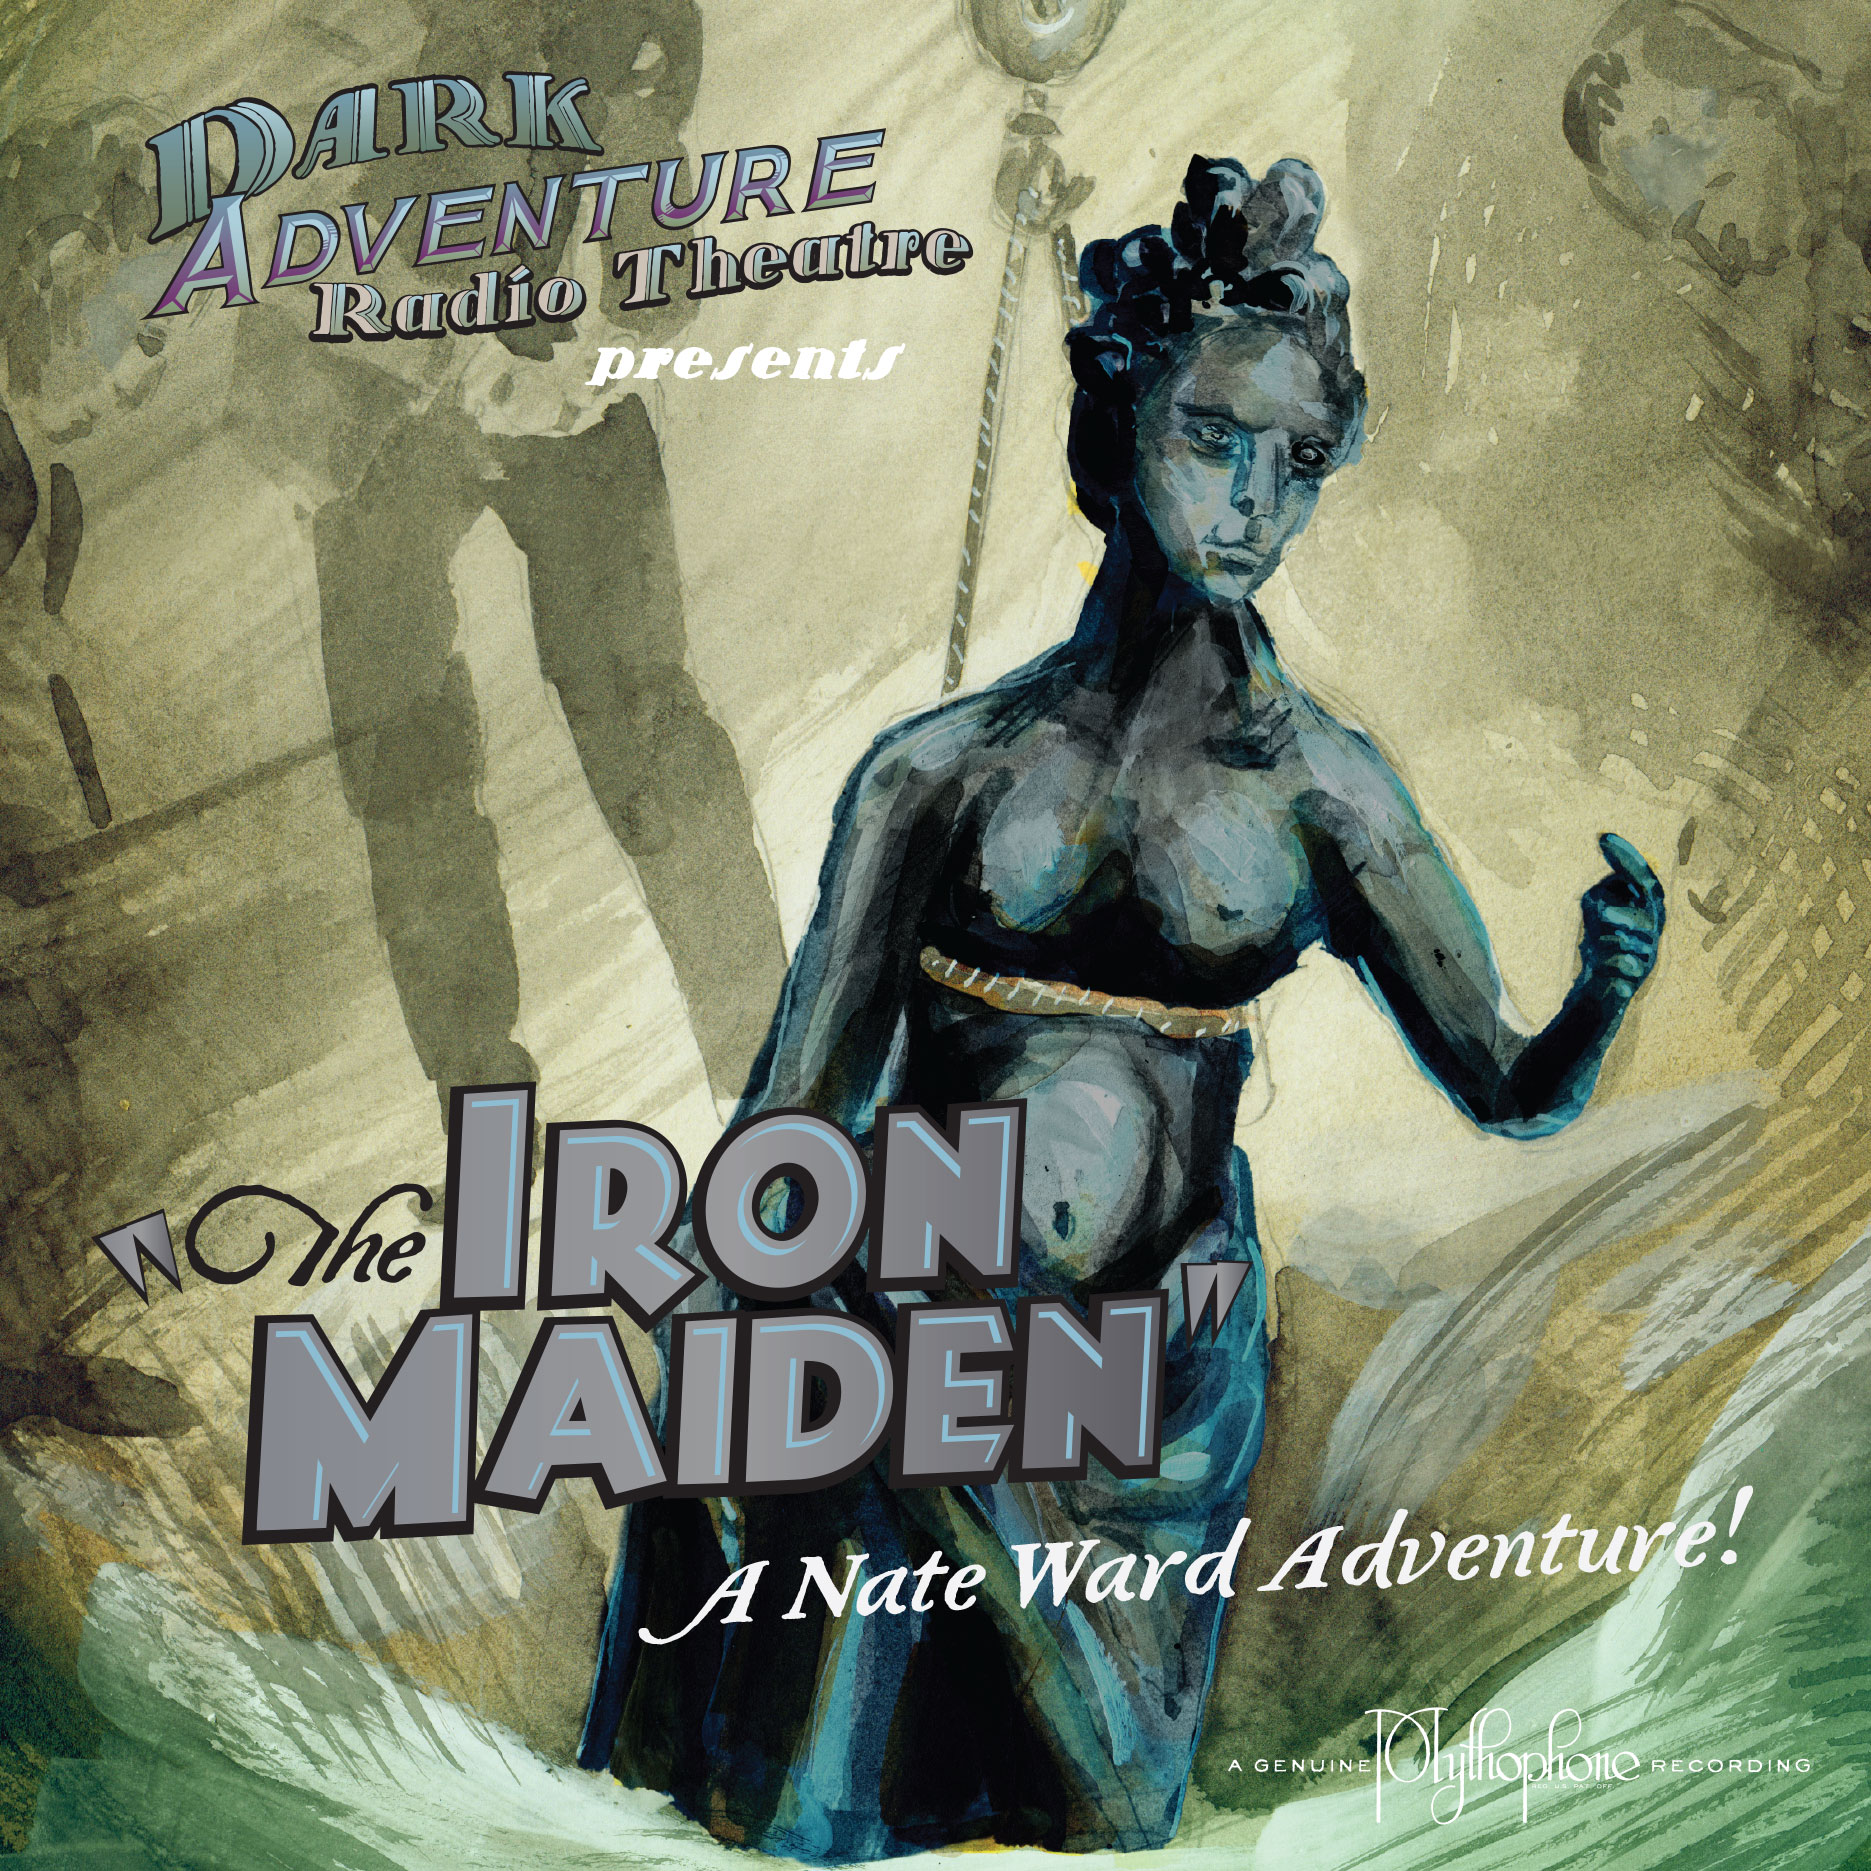 The Iron Maiden cover